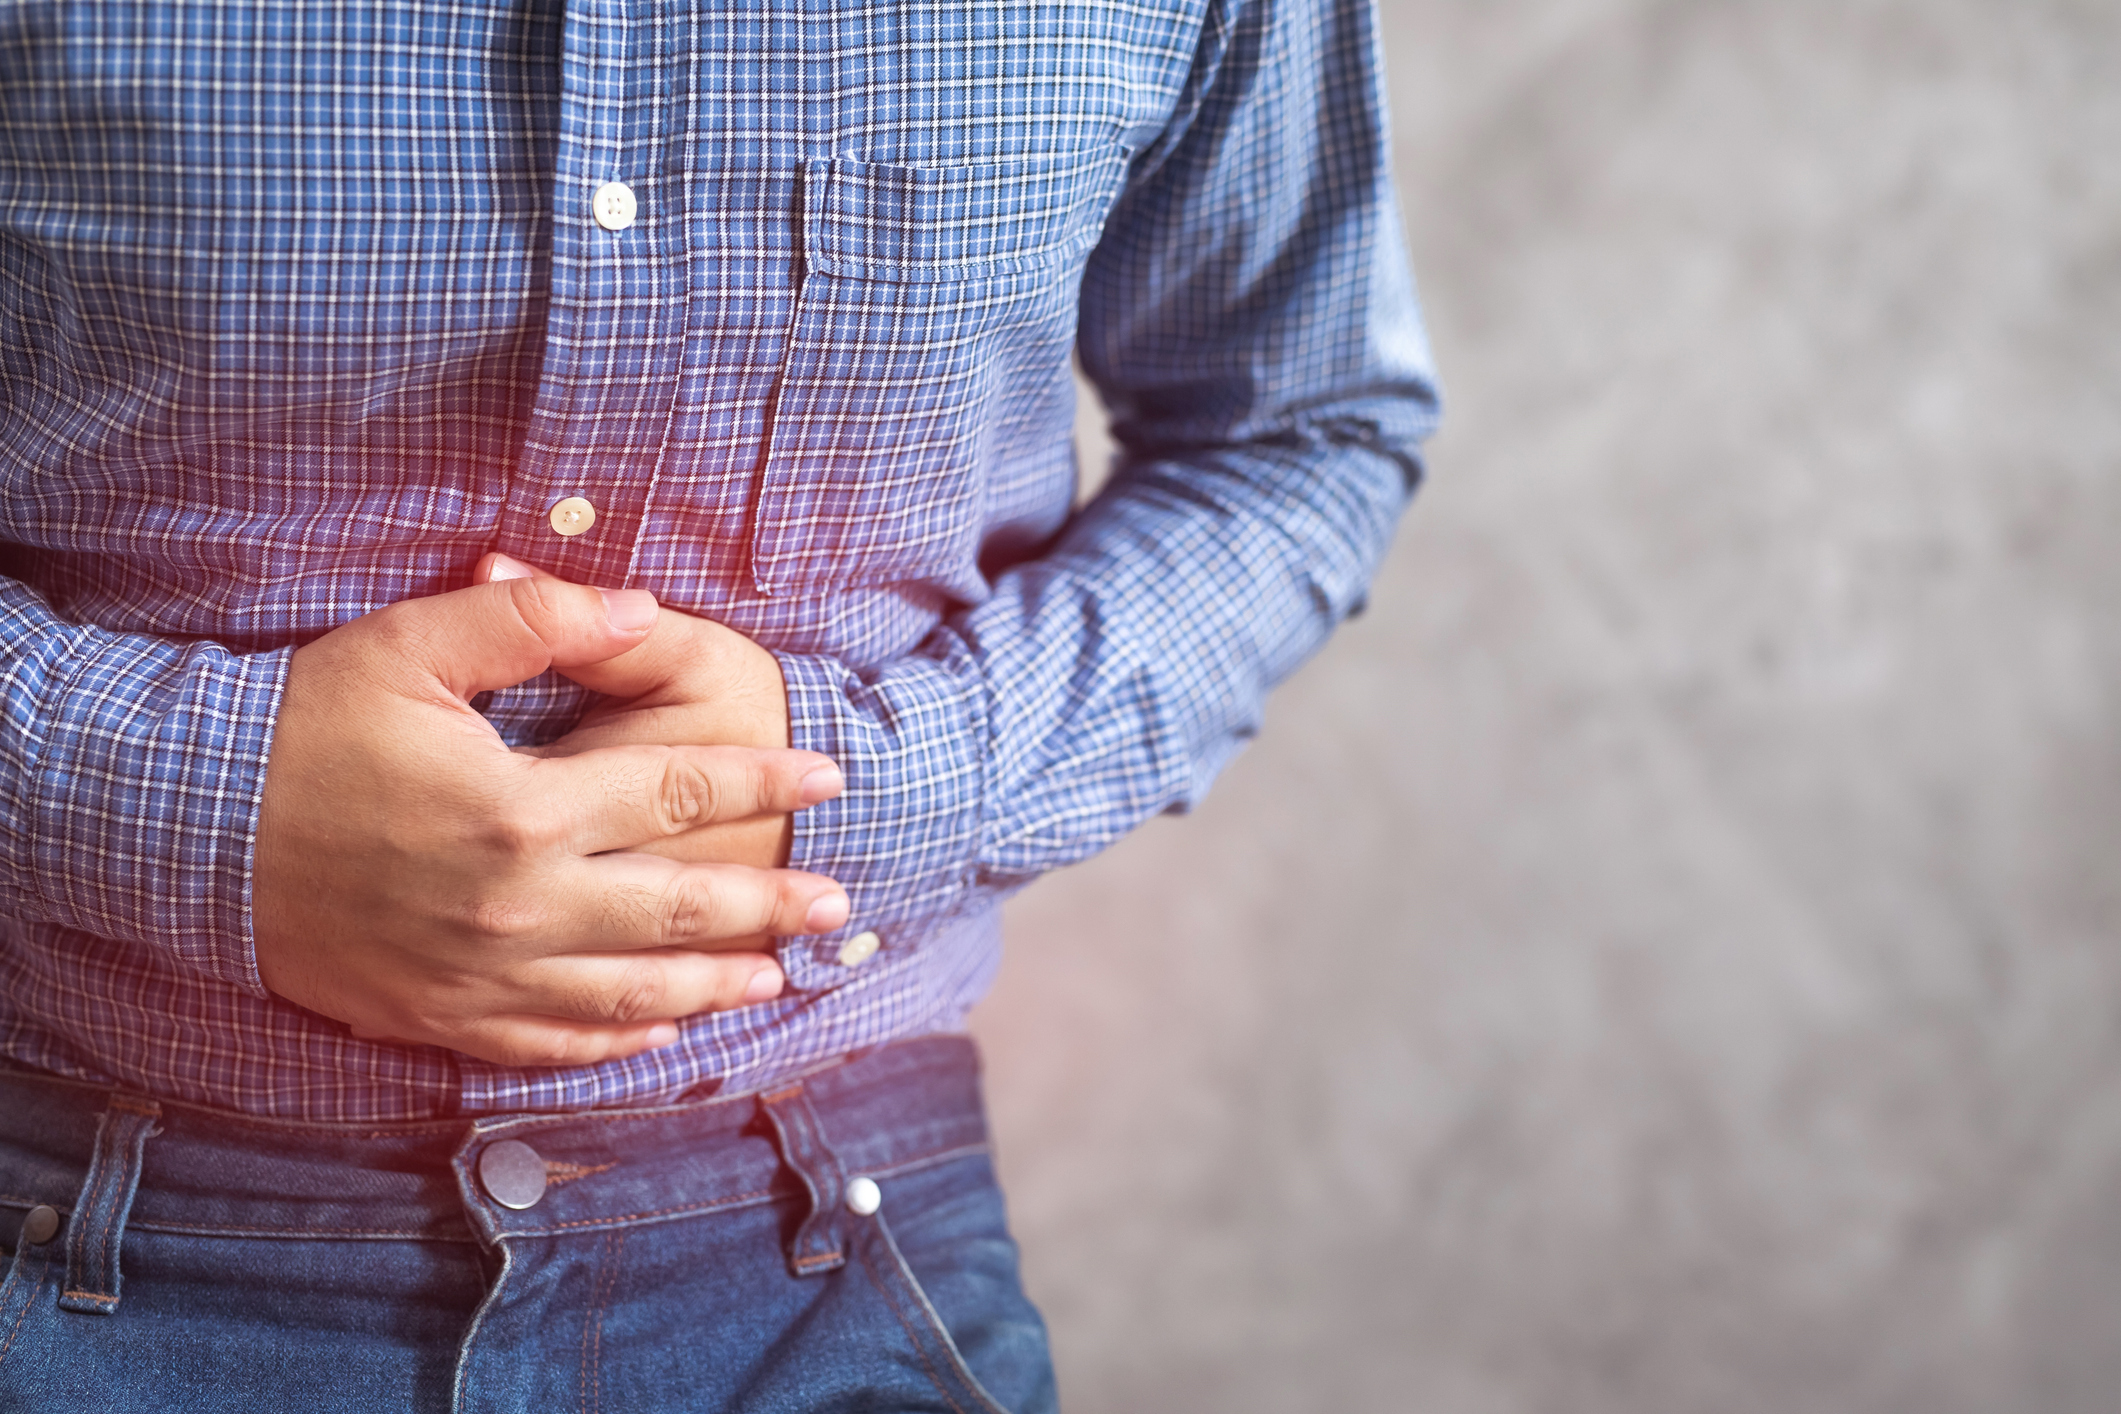 Managing IBS May Be About More T...